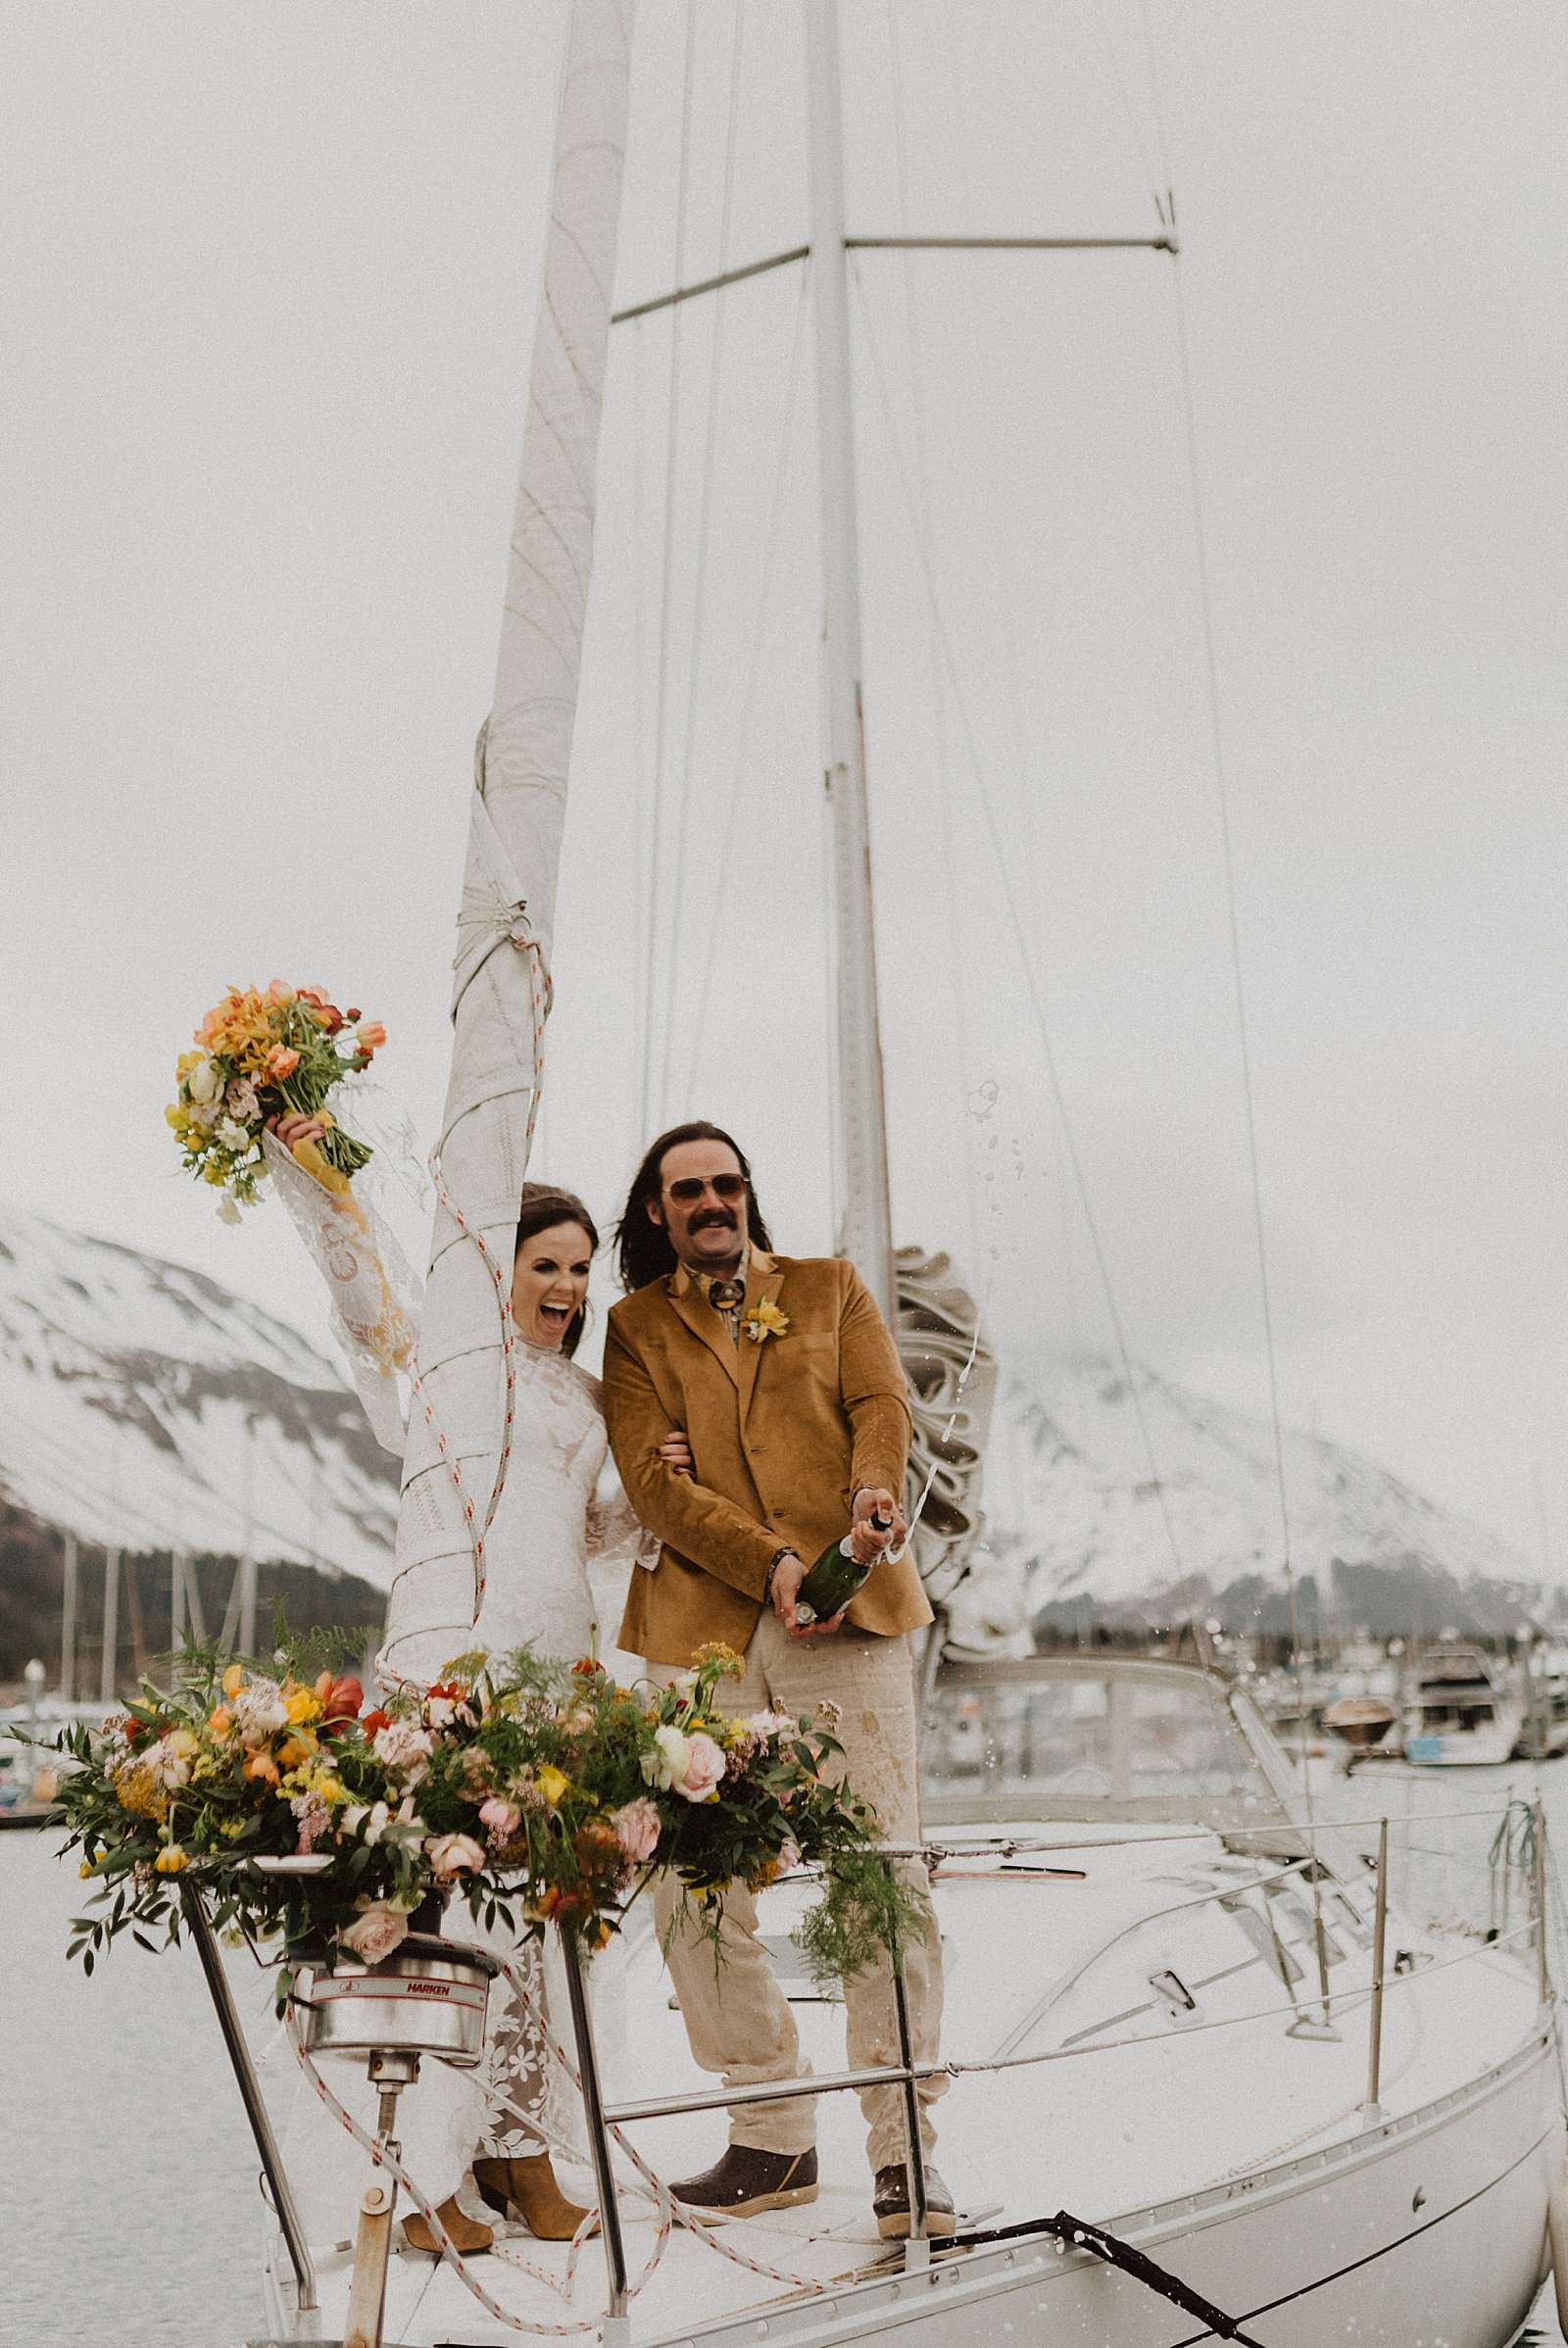  Bride and groom popping champagne on a boat celebrating in Alaska 